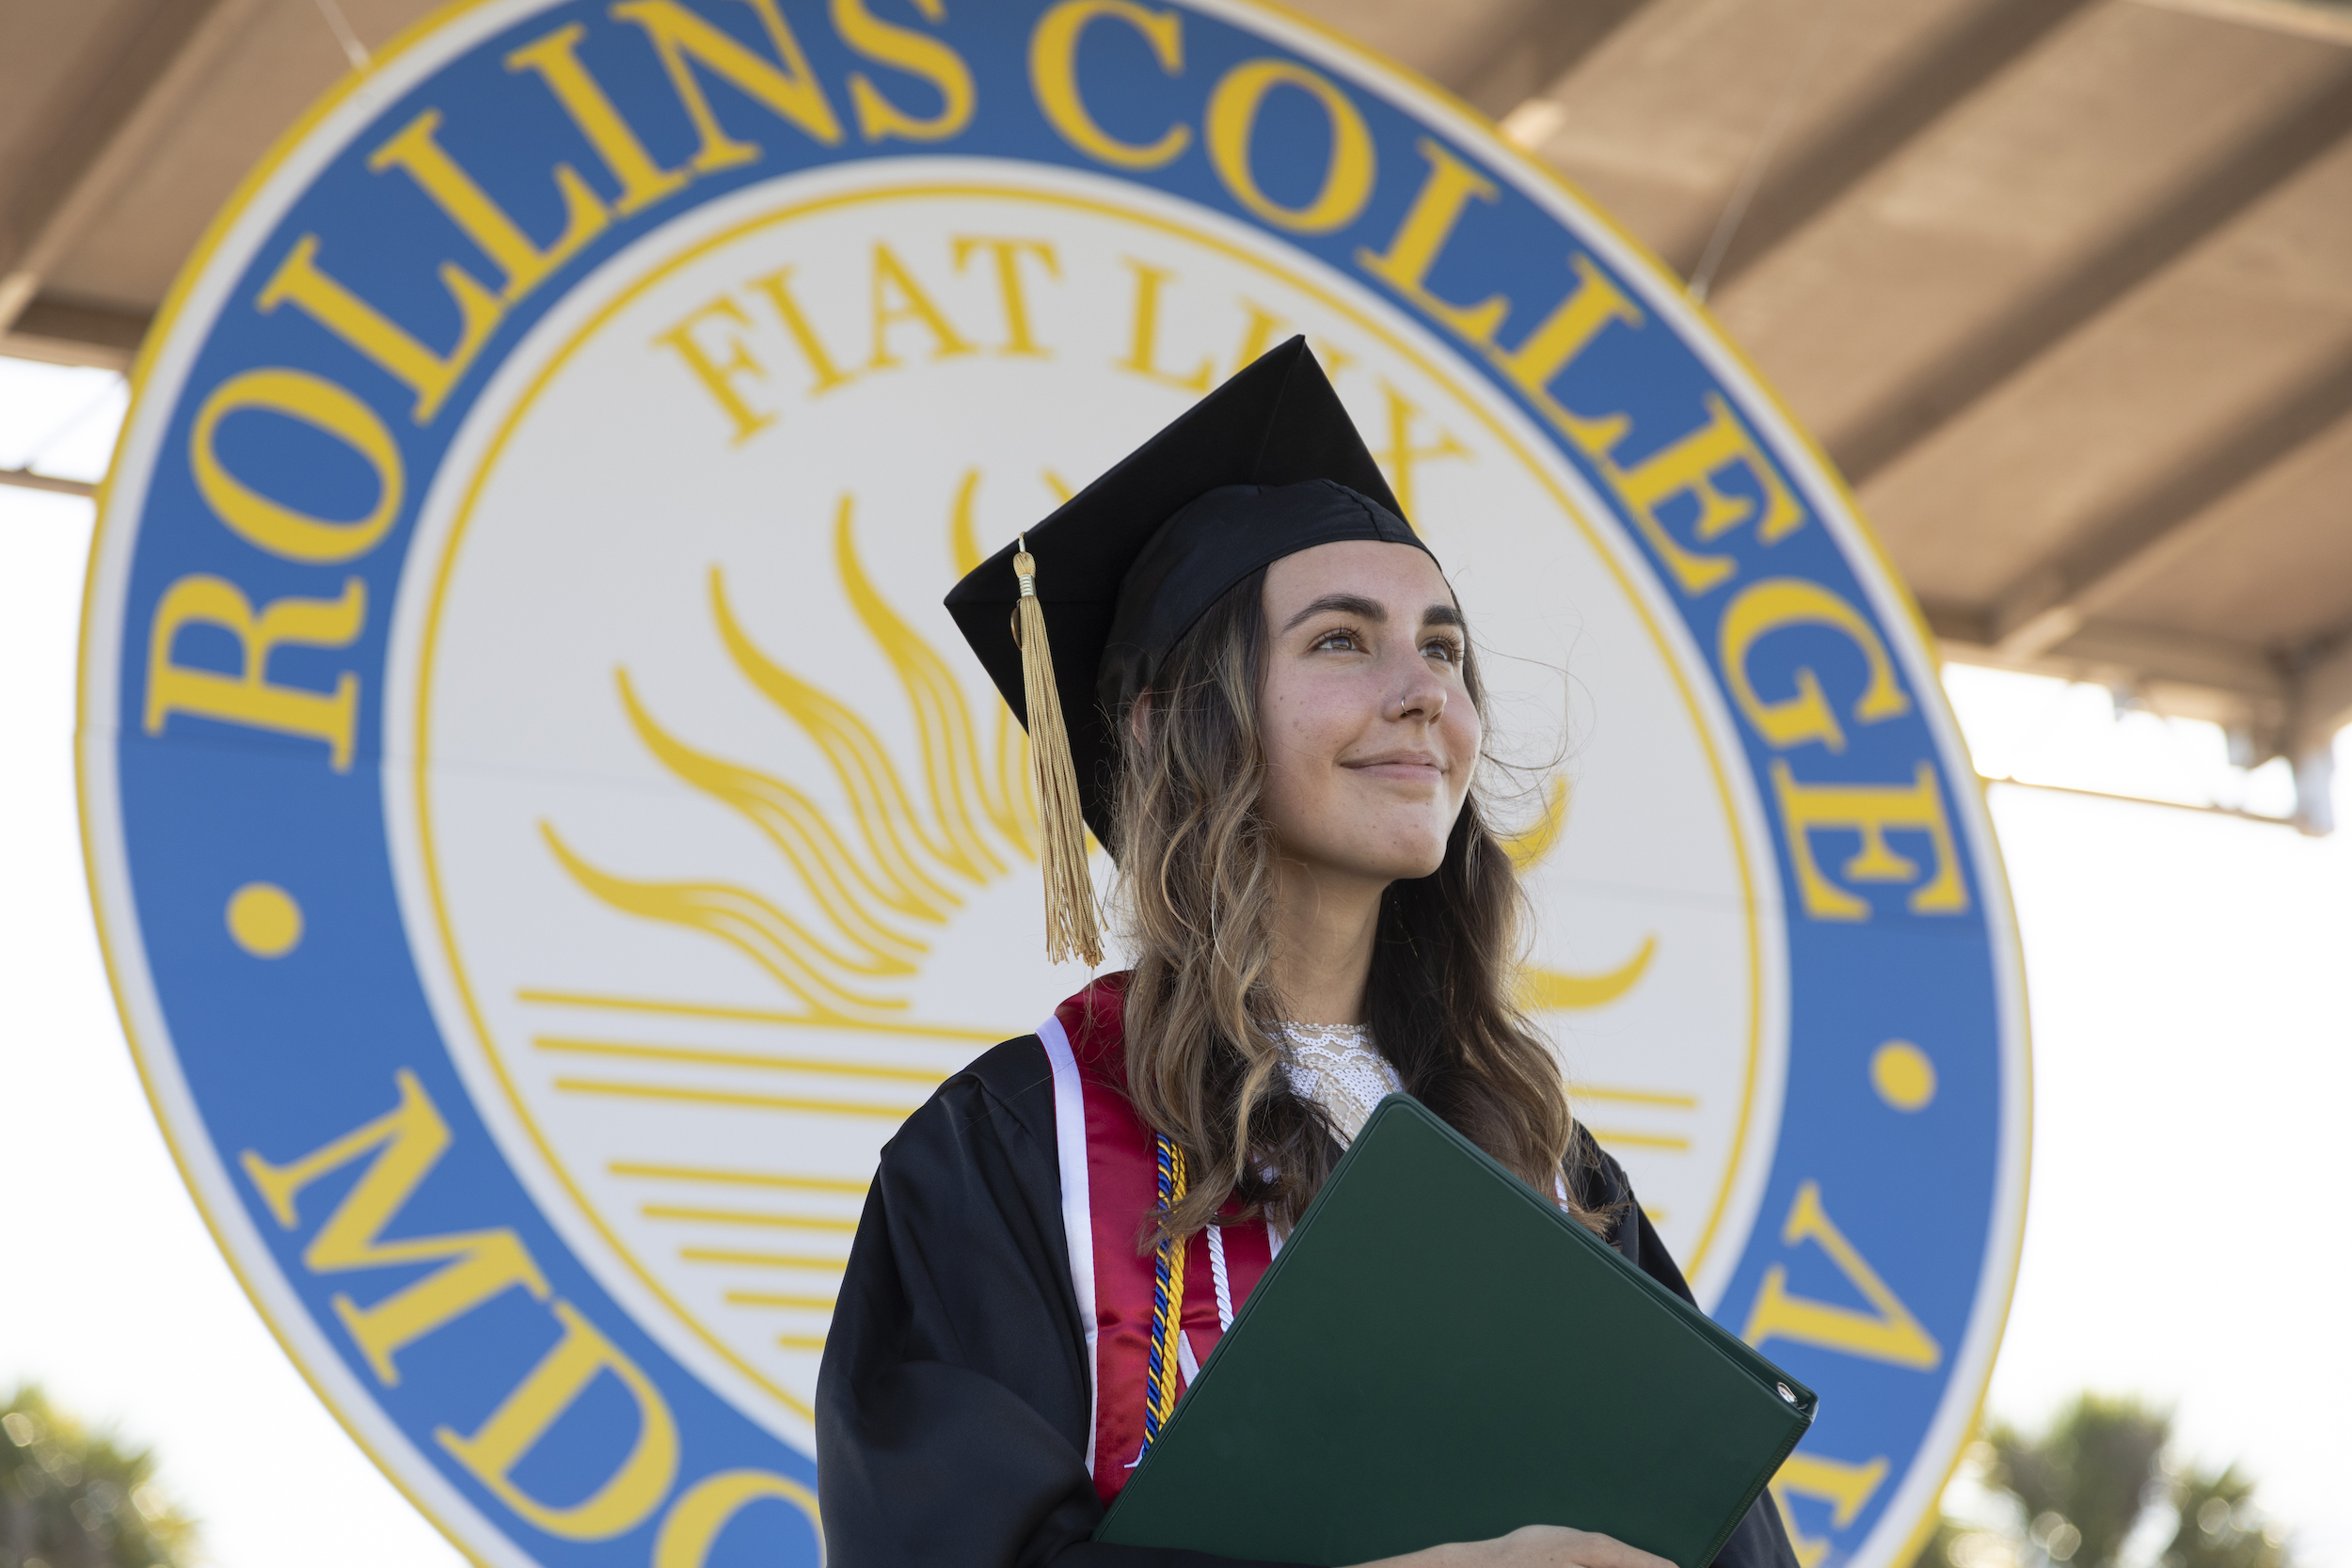 Photo shows graduate holding diploma in front of the Rollins College crest.